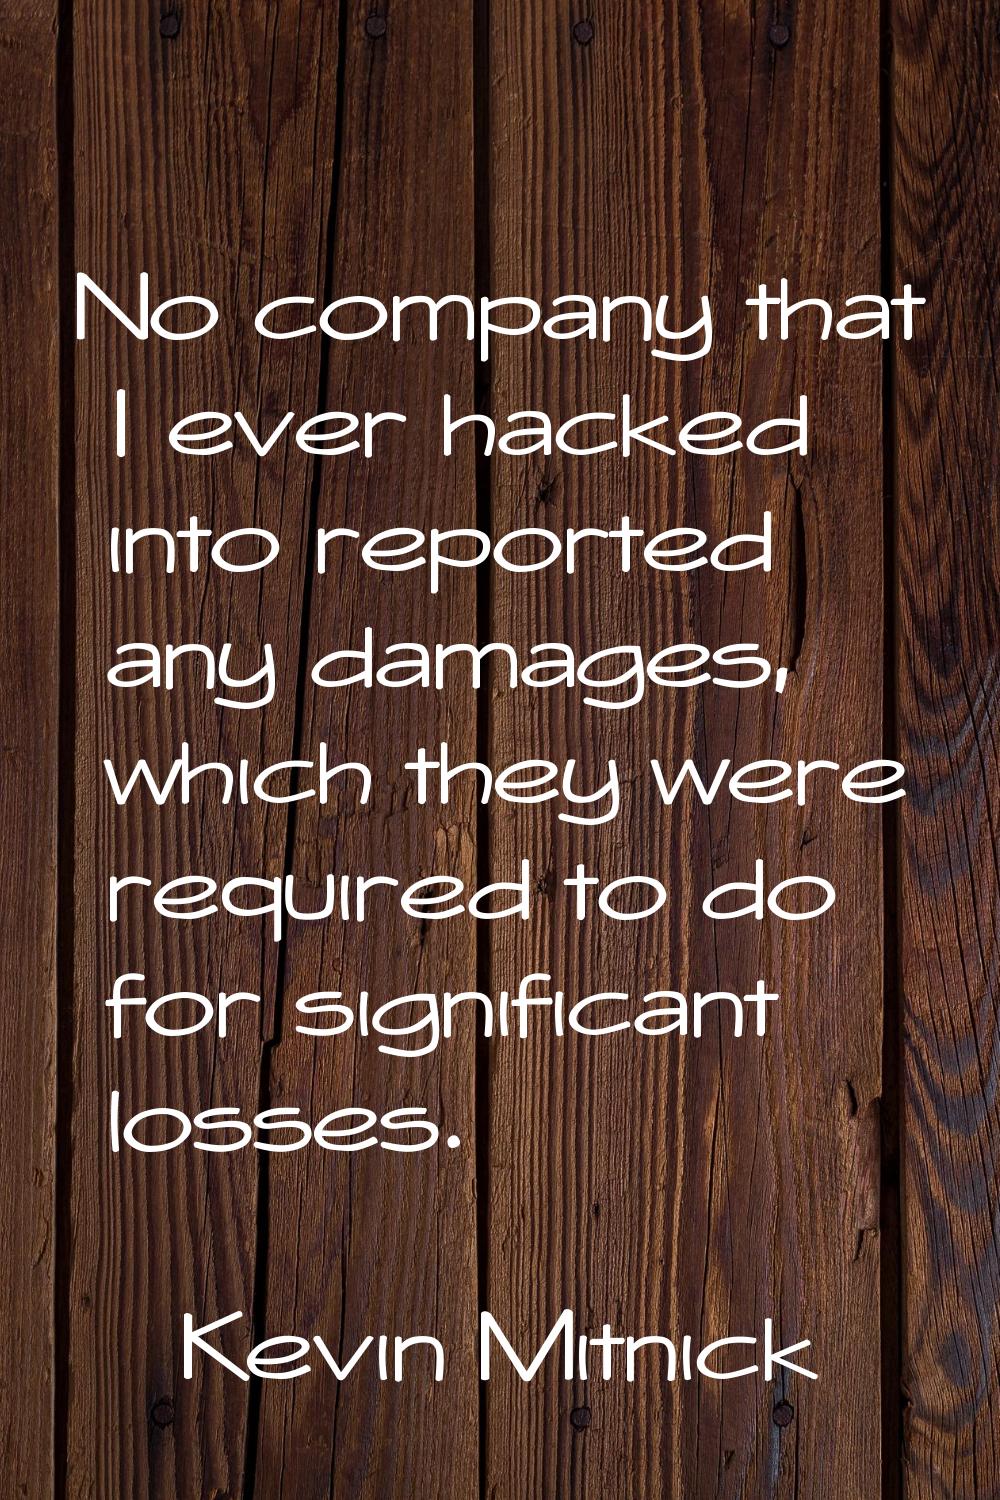 No company that I ever hacked into reported any damages, which they were required to do for signifi